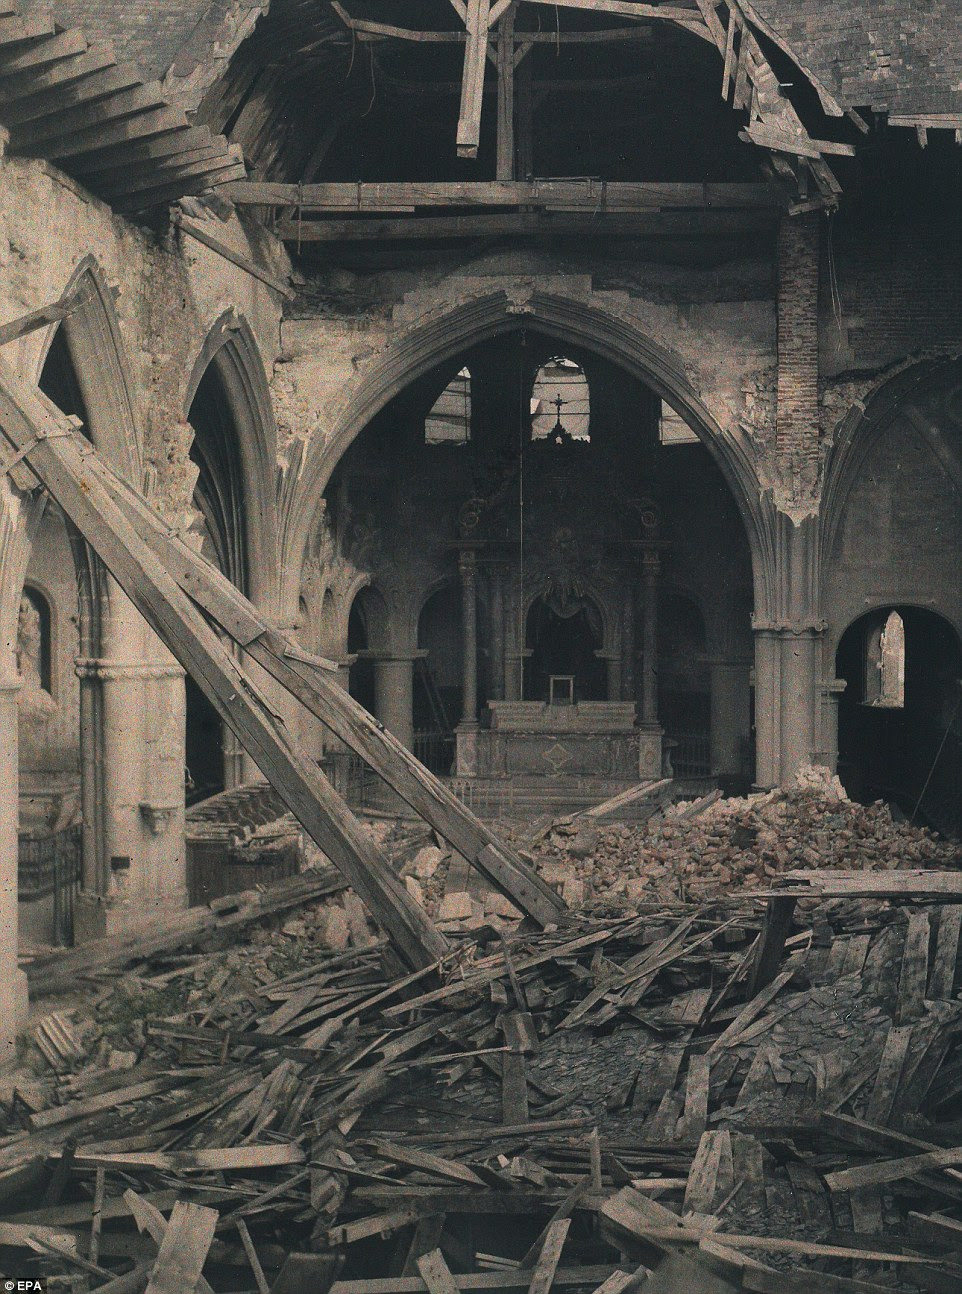 Trail of destruction: This image, taken in 1917, shows debris inside a 'ruined church'. It is believed to have been located in France